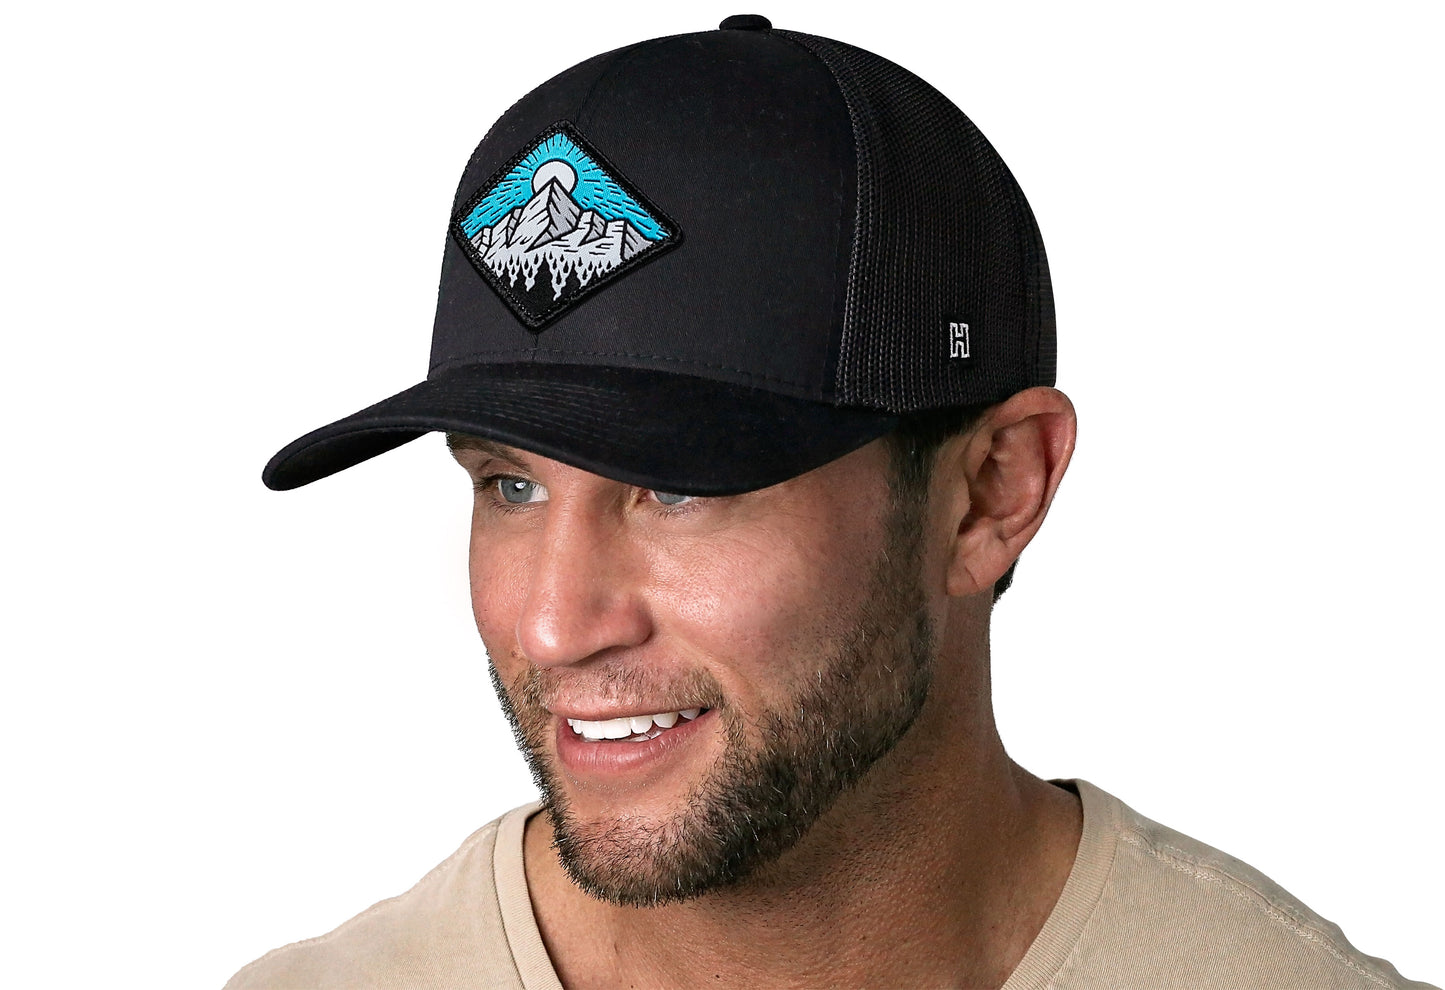 Mountains and Trees Trucker Hat  |  Black Outdoors Snapback